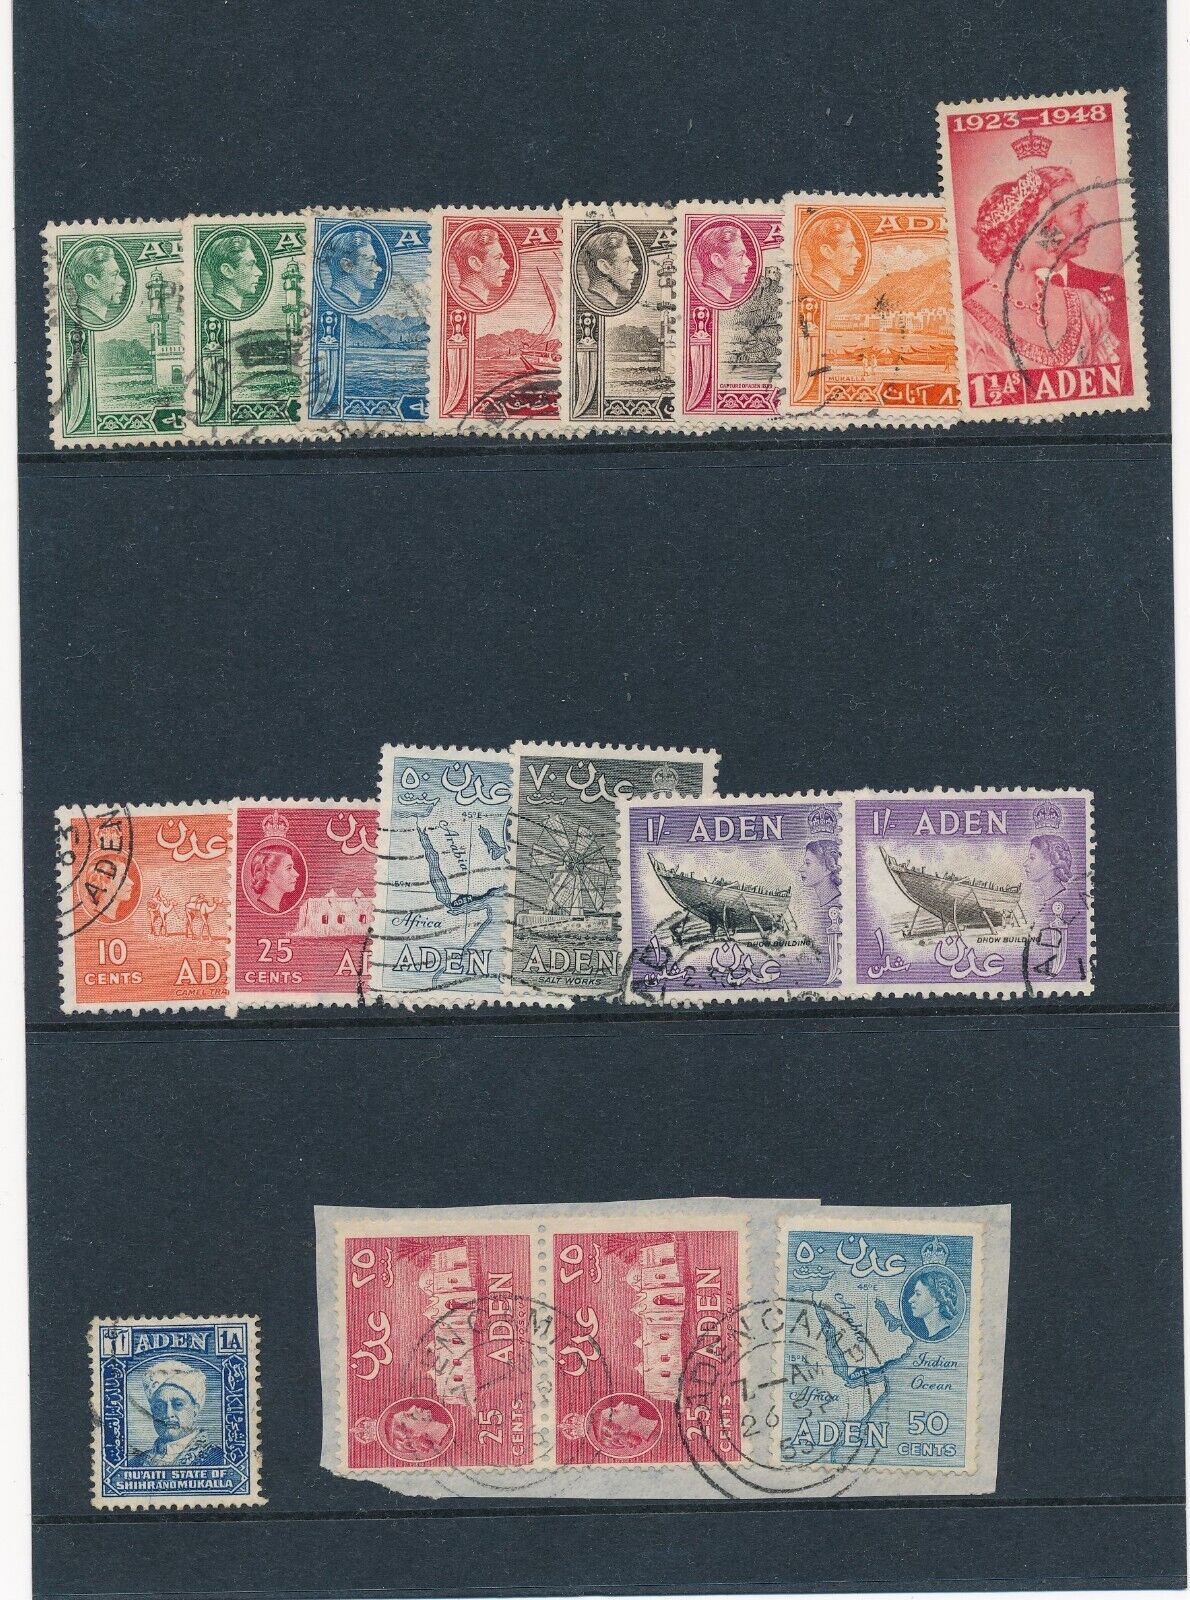 Aden Used Stamps, Small Lot